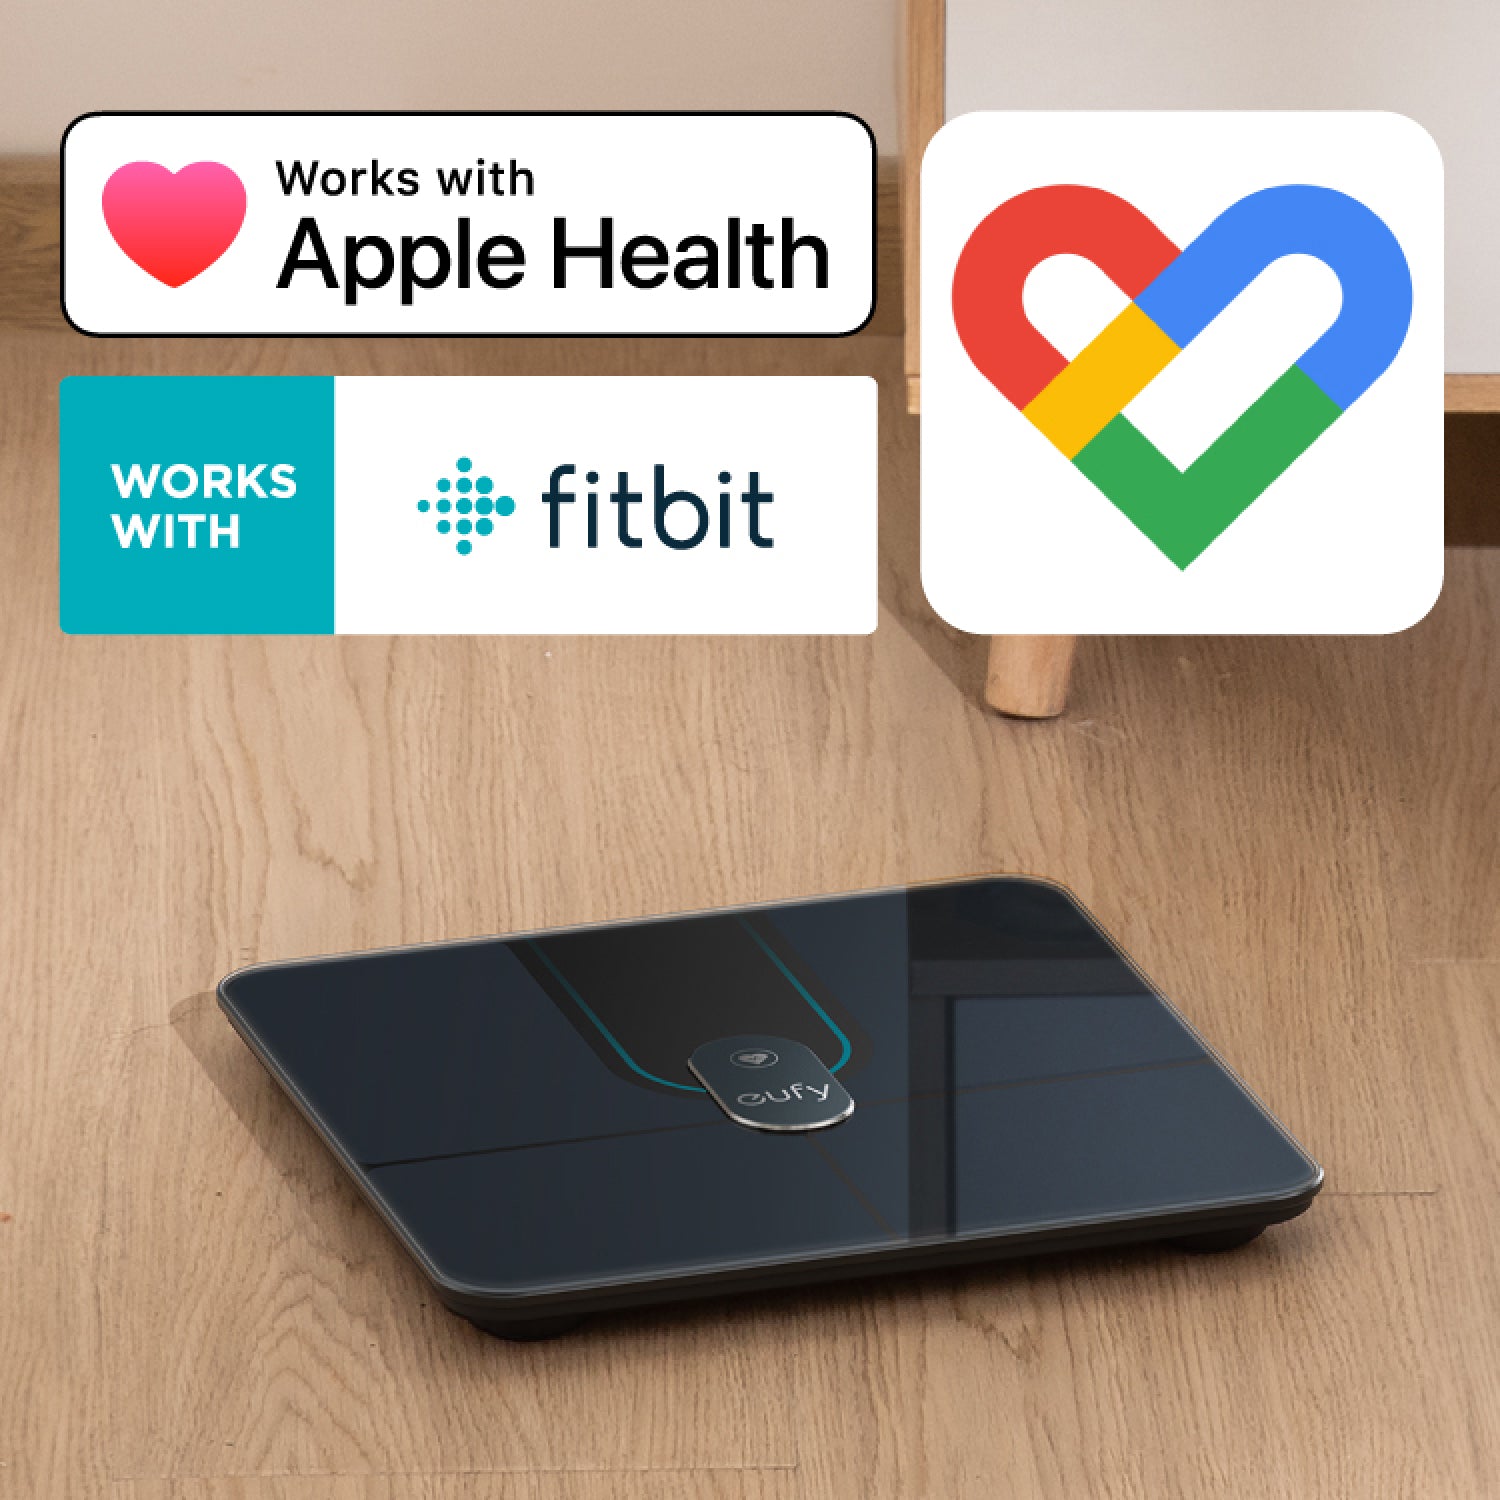 Eufy Smart Scale P2 Pro: New smart scale launches with Apple